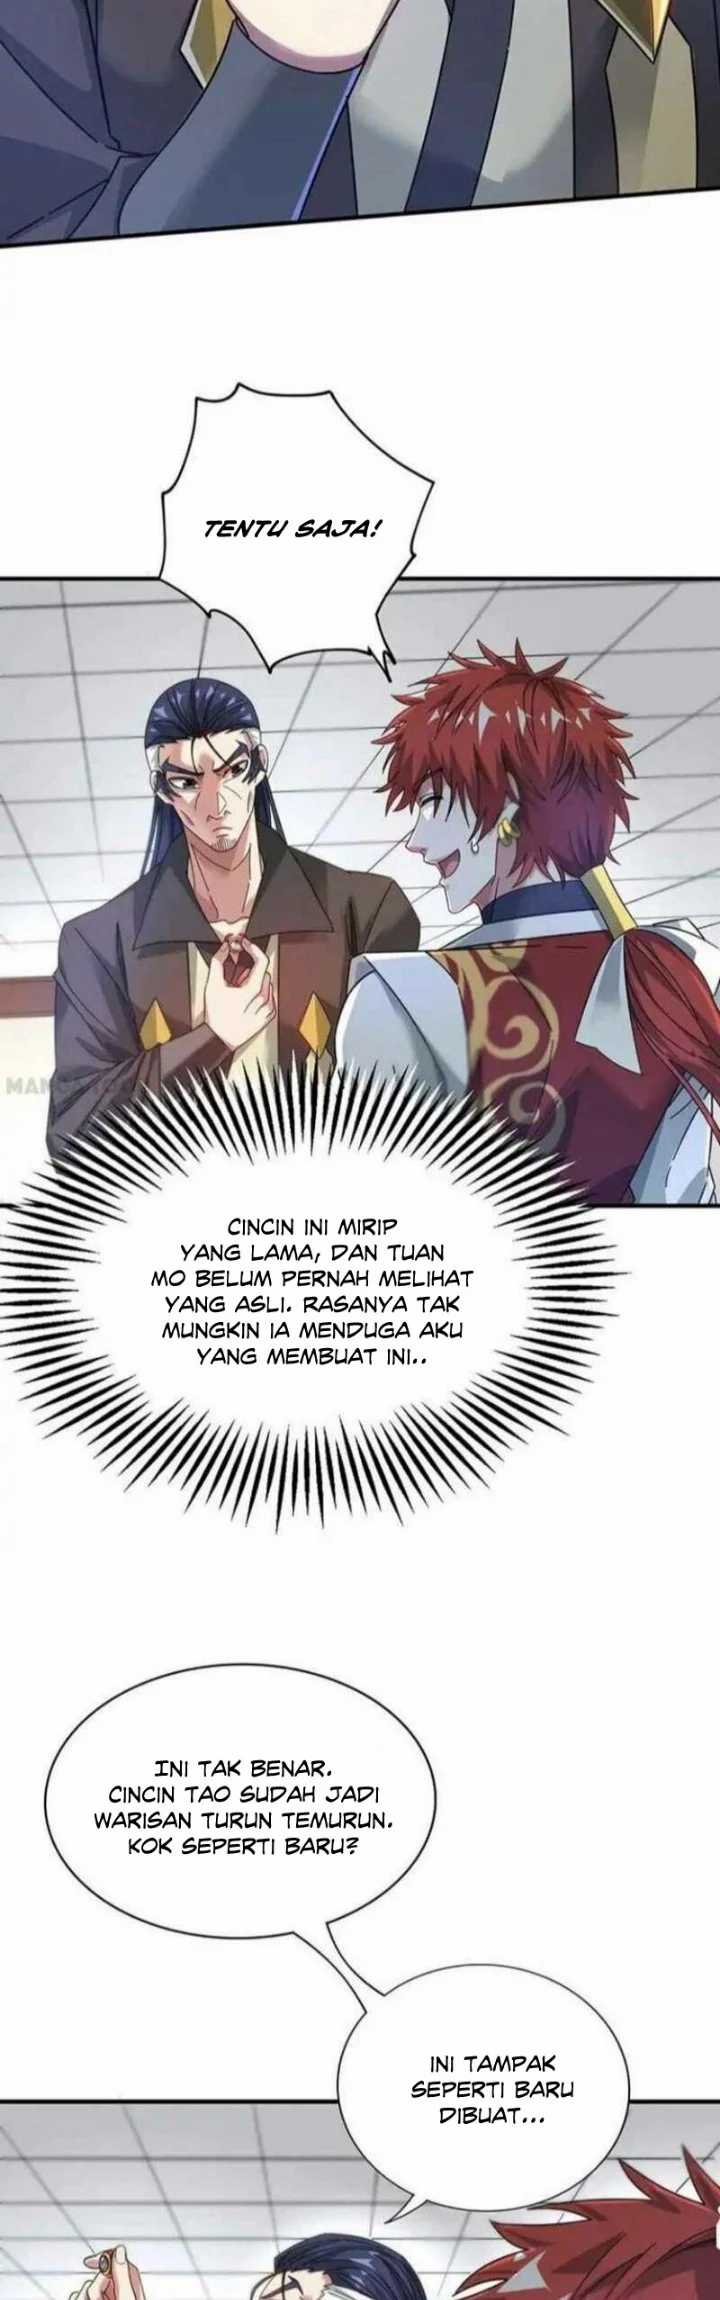 The First Son-In-Law Vanguard Of All Time Chapter 208 - 137